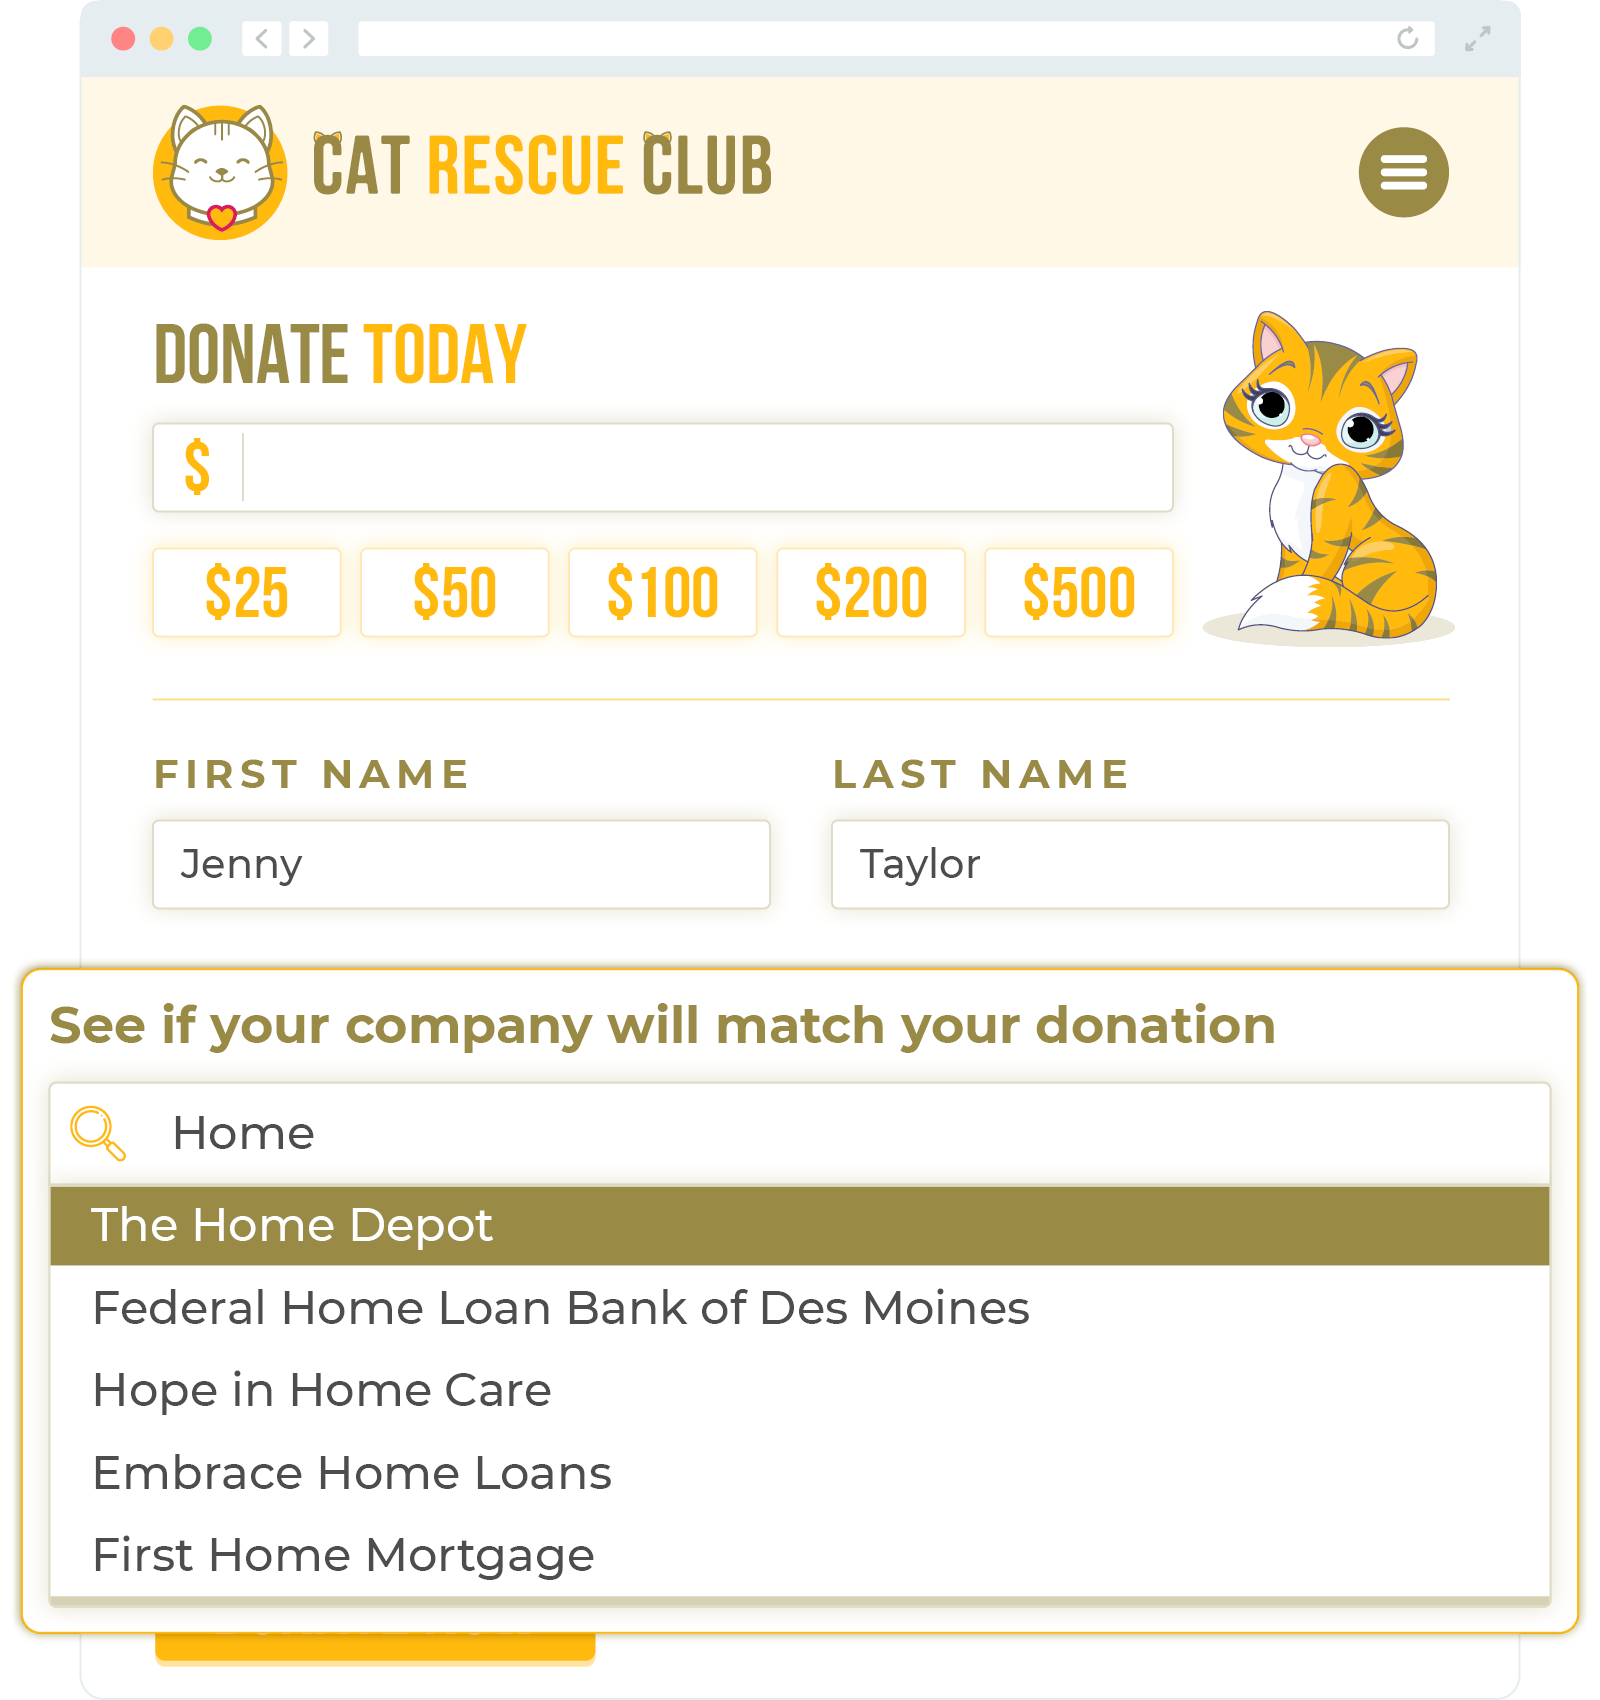 Marketing matching gifts on your donation page